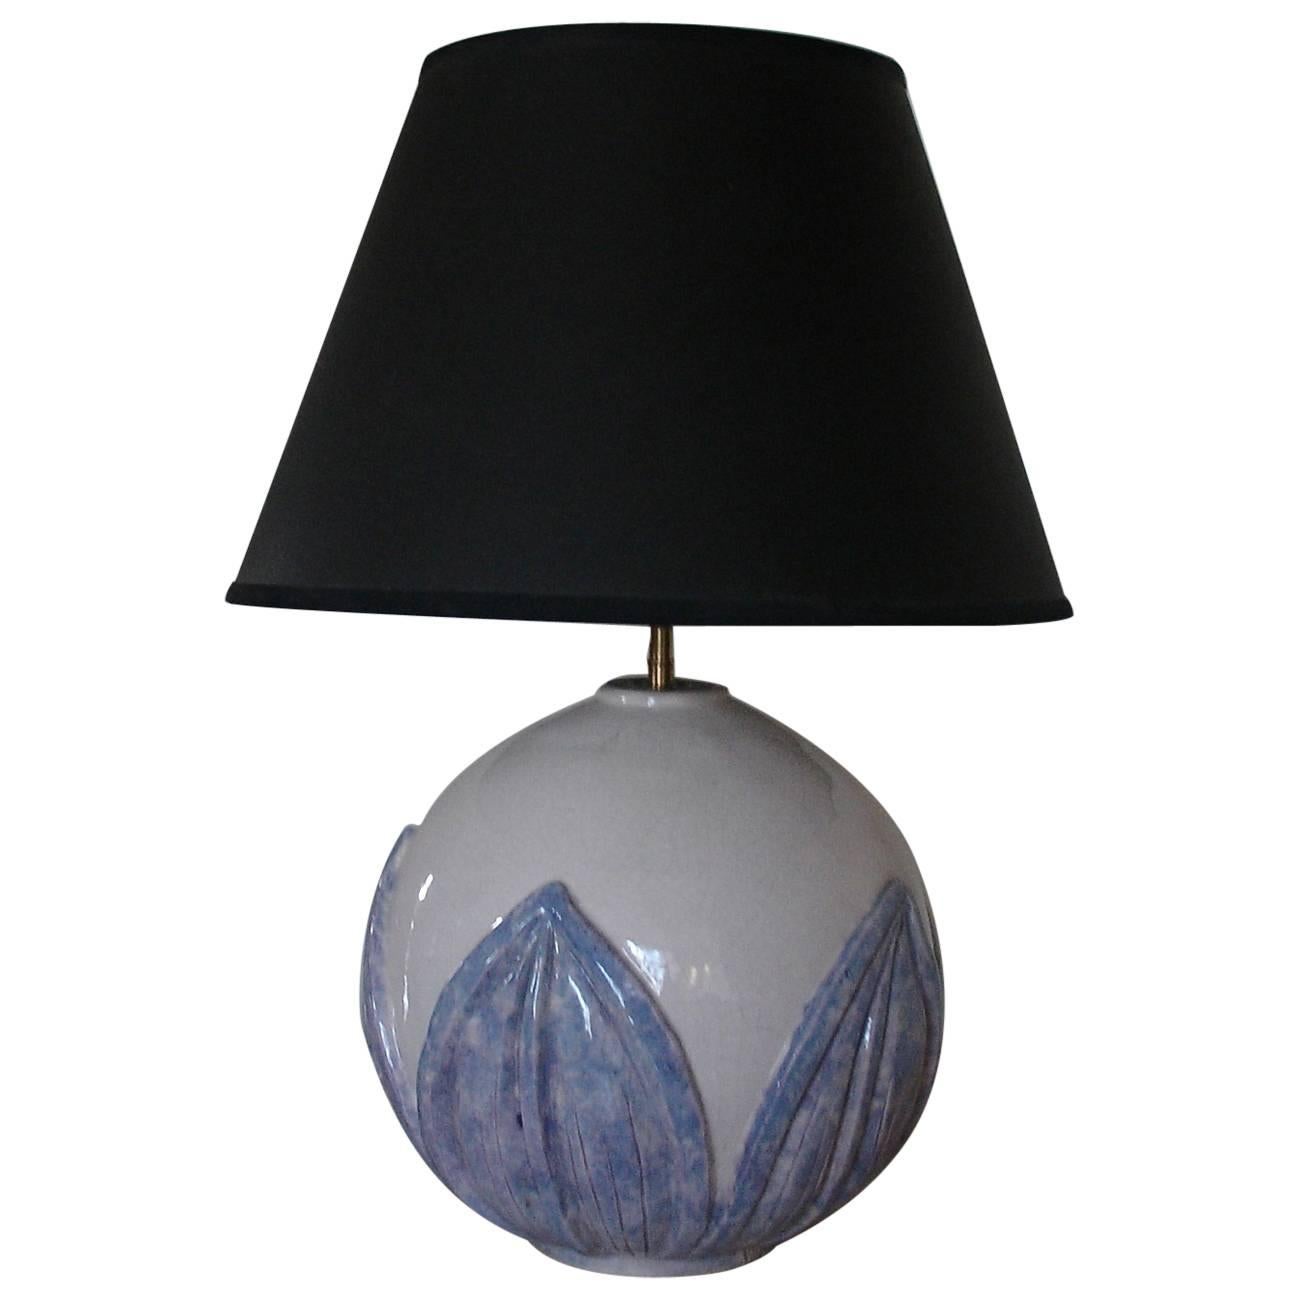 1930's French Large Ceramic Lamp, White and Blue Crackled Glazed signed Wibaux For Sale